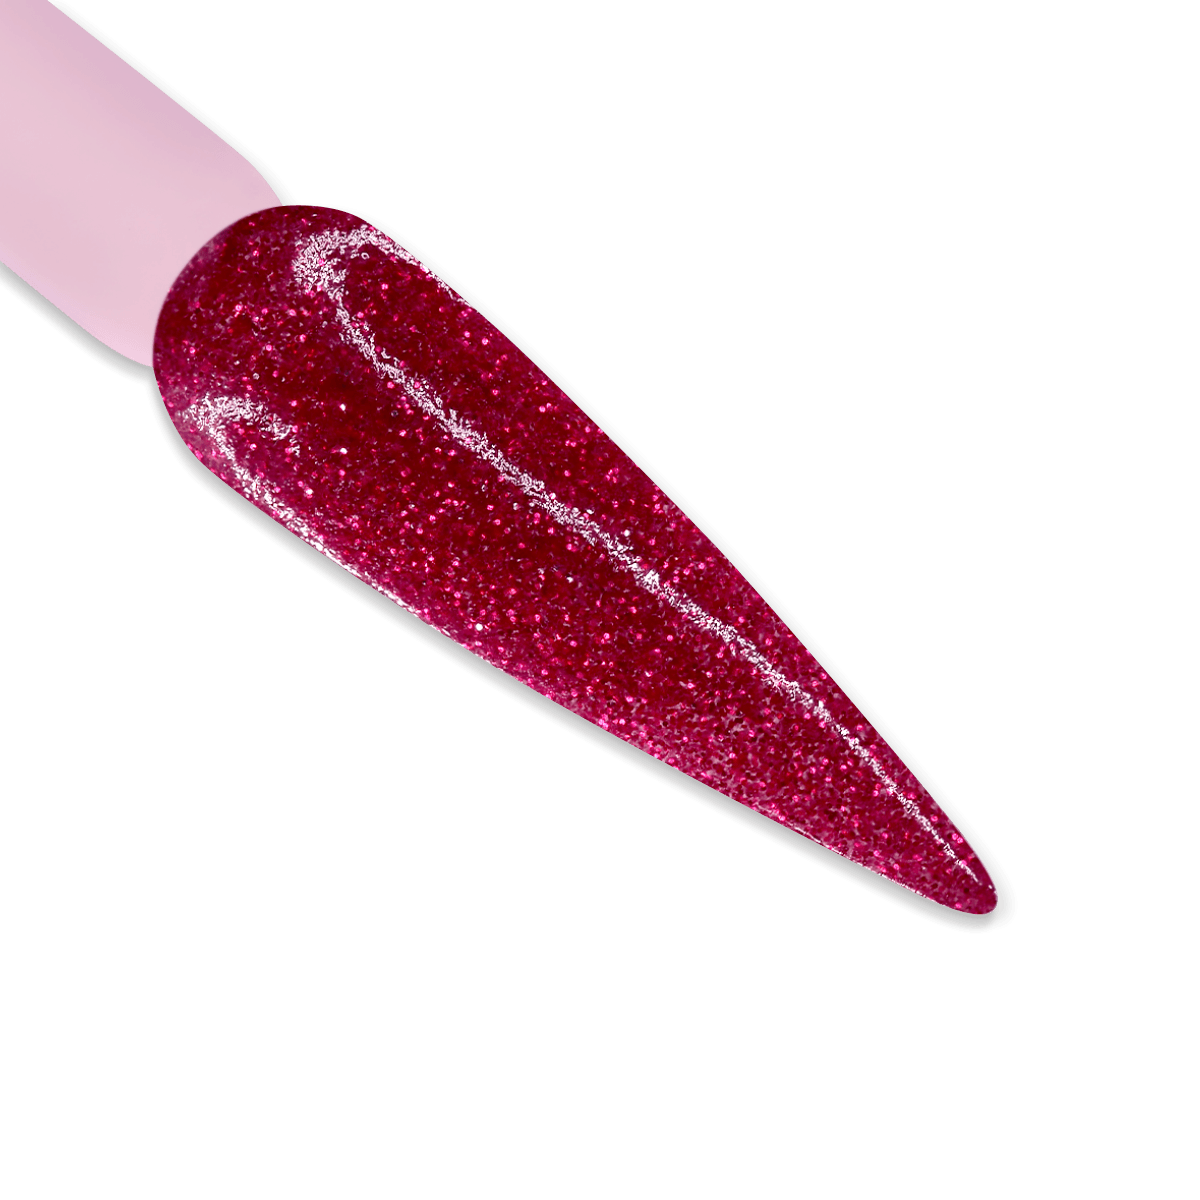 IGel Duo Gel Polish + Matching Nail Lacquer DD 154 RUBY SLIPPERS